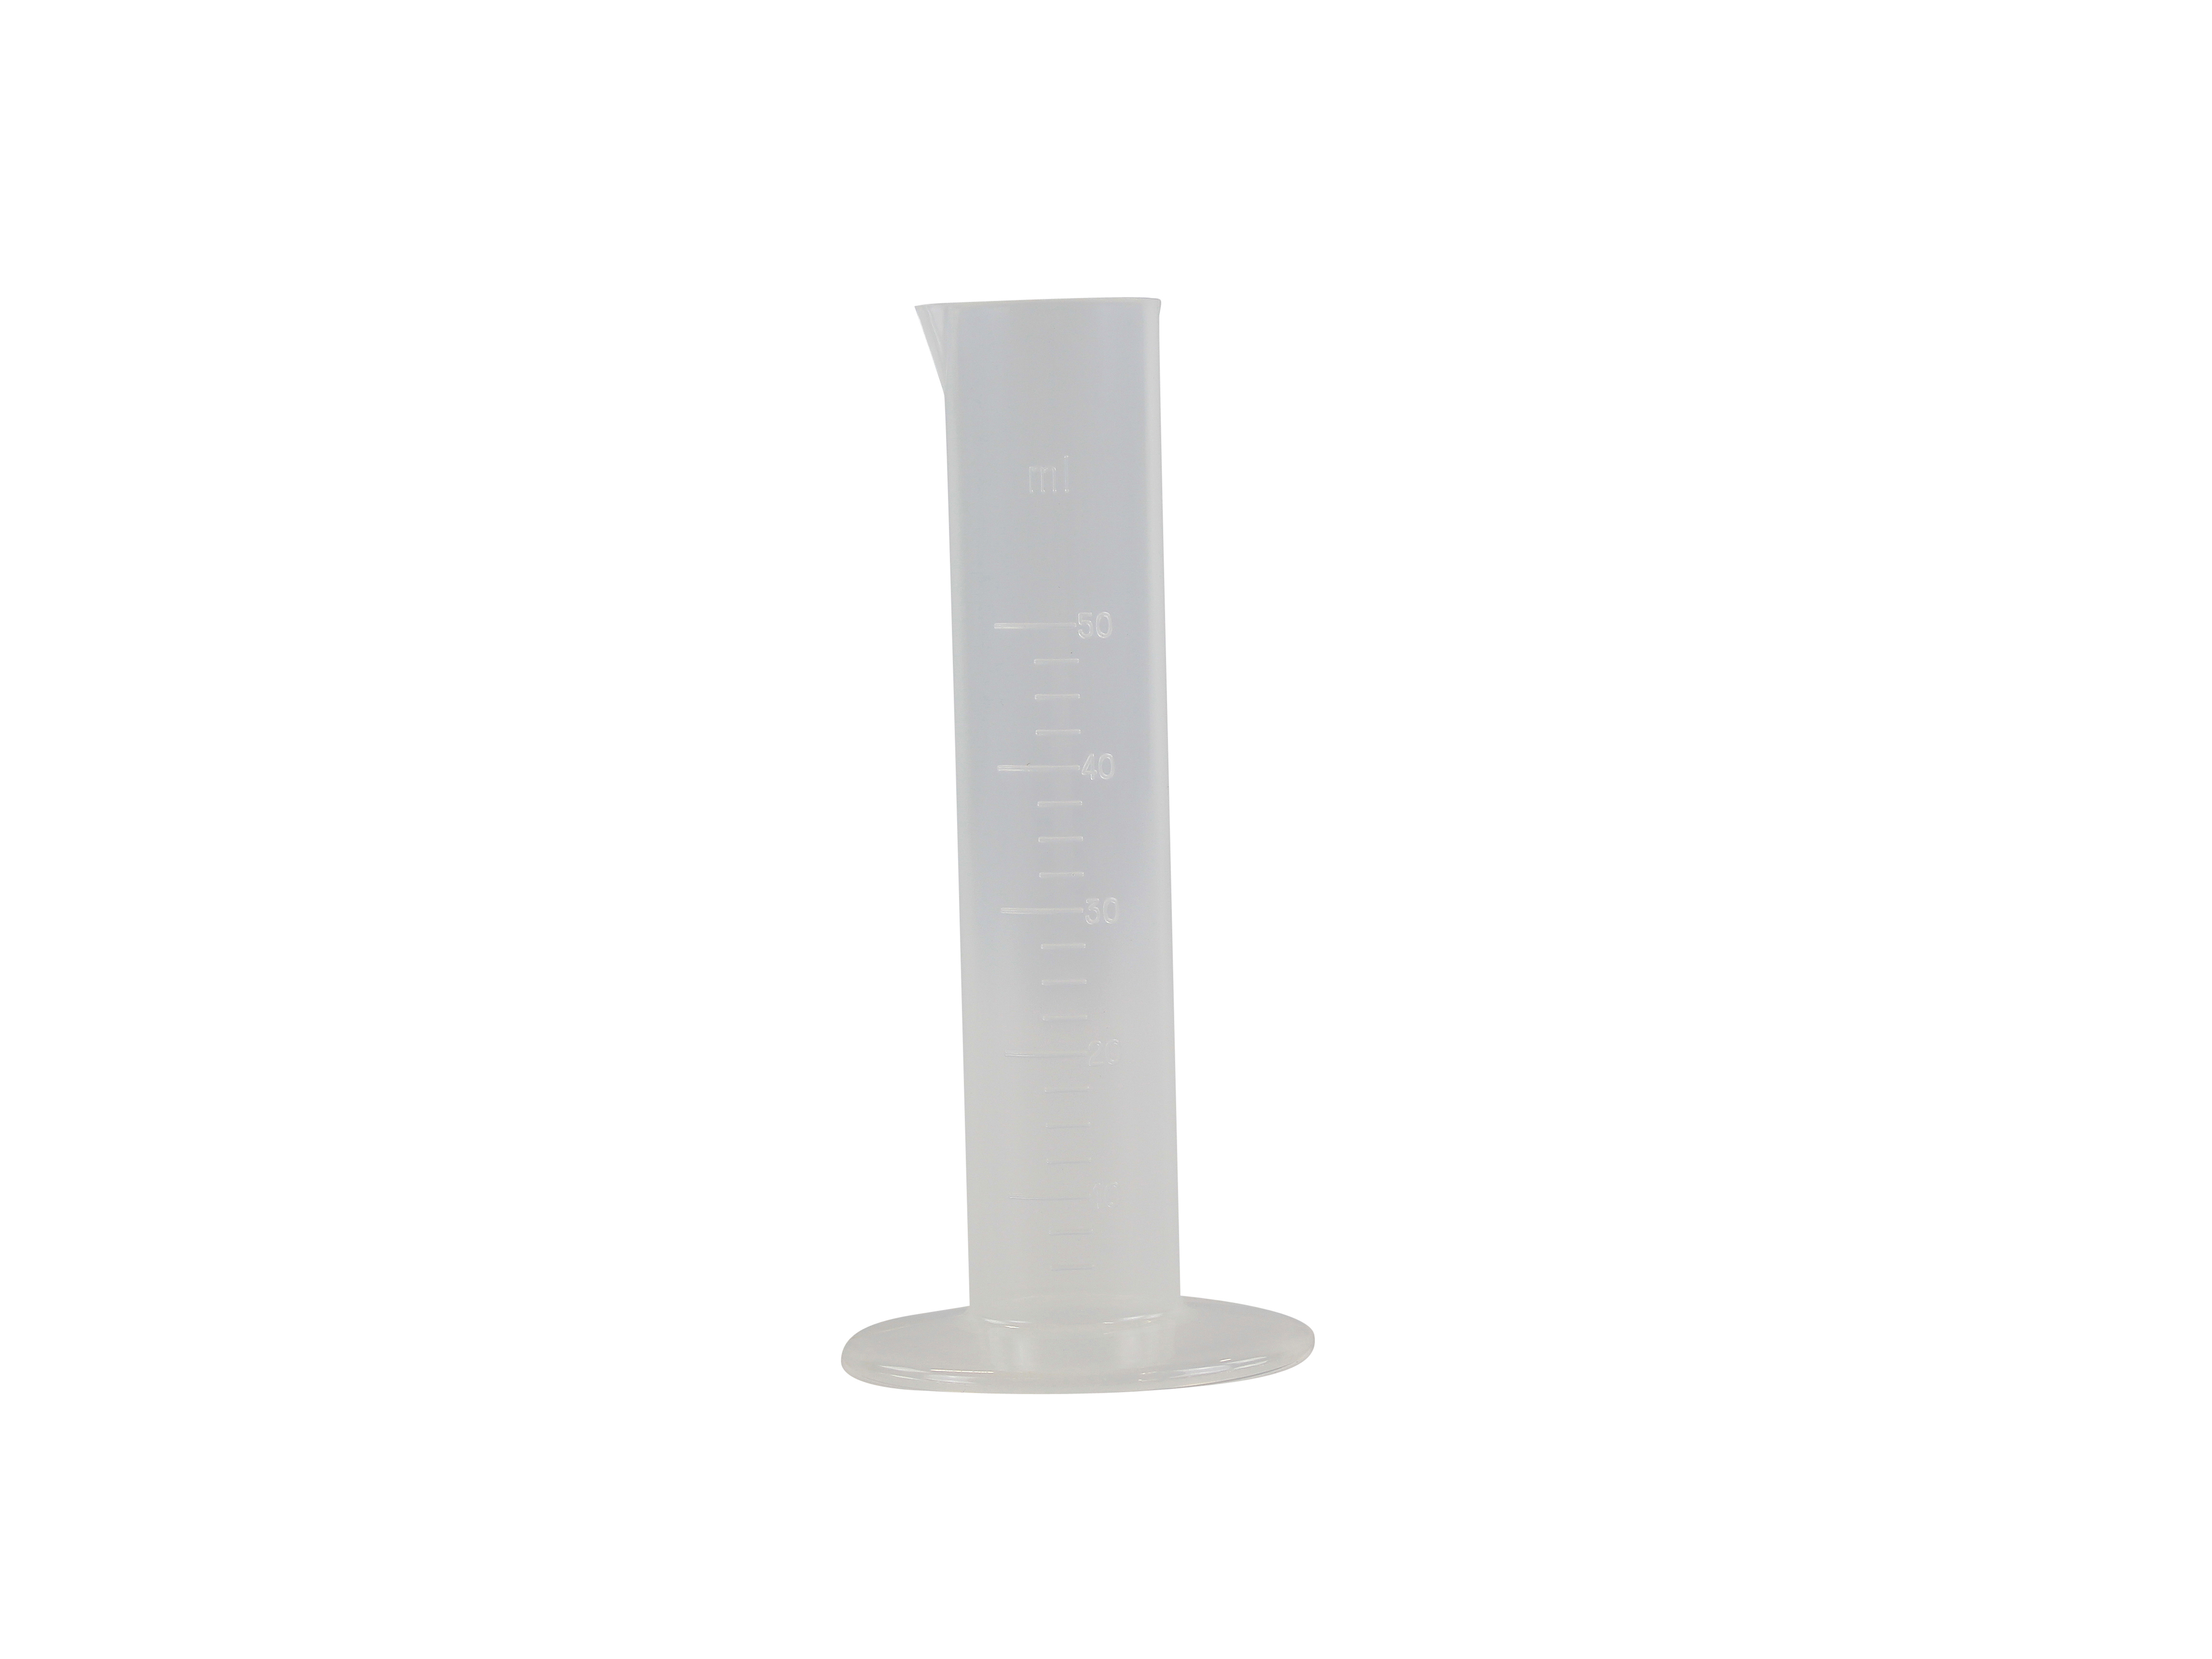 Measuring cylinder 50 ml - different sizes available